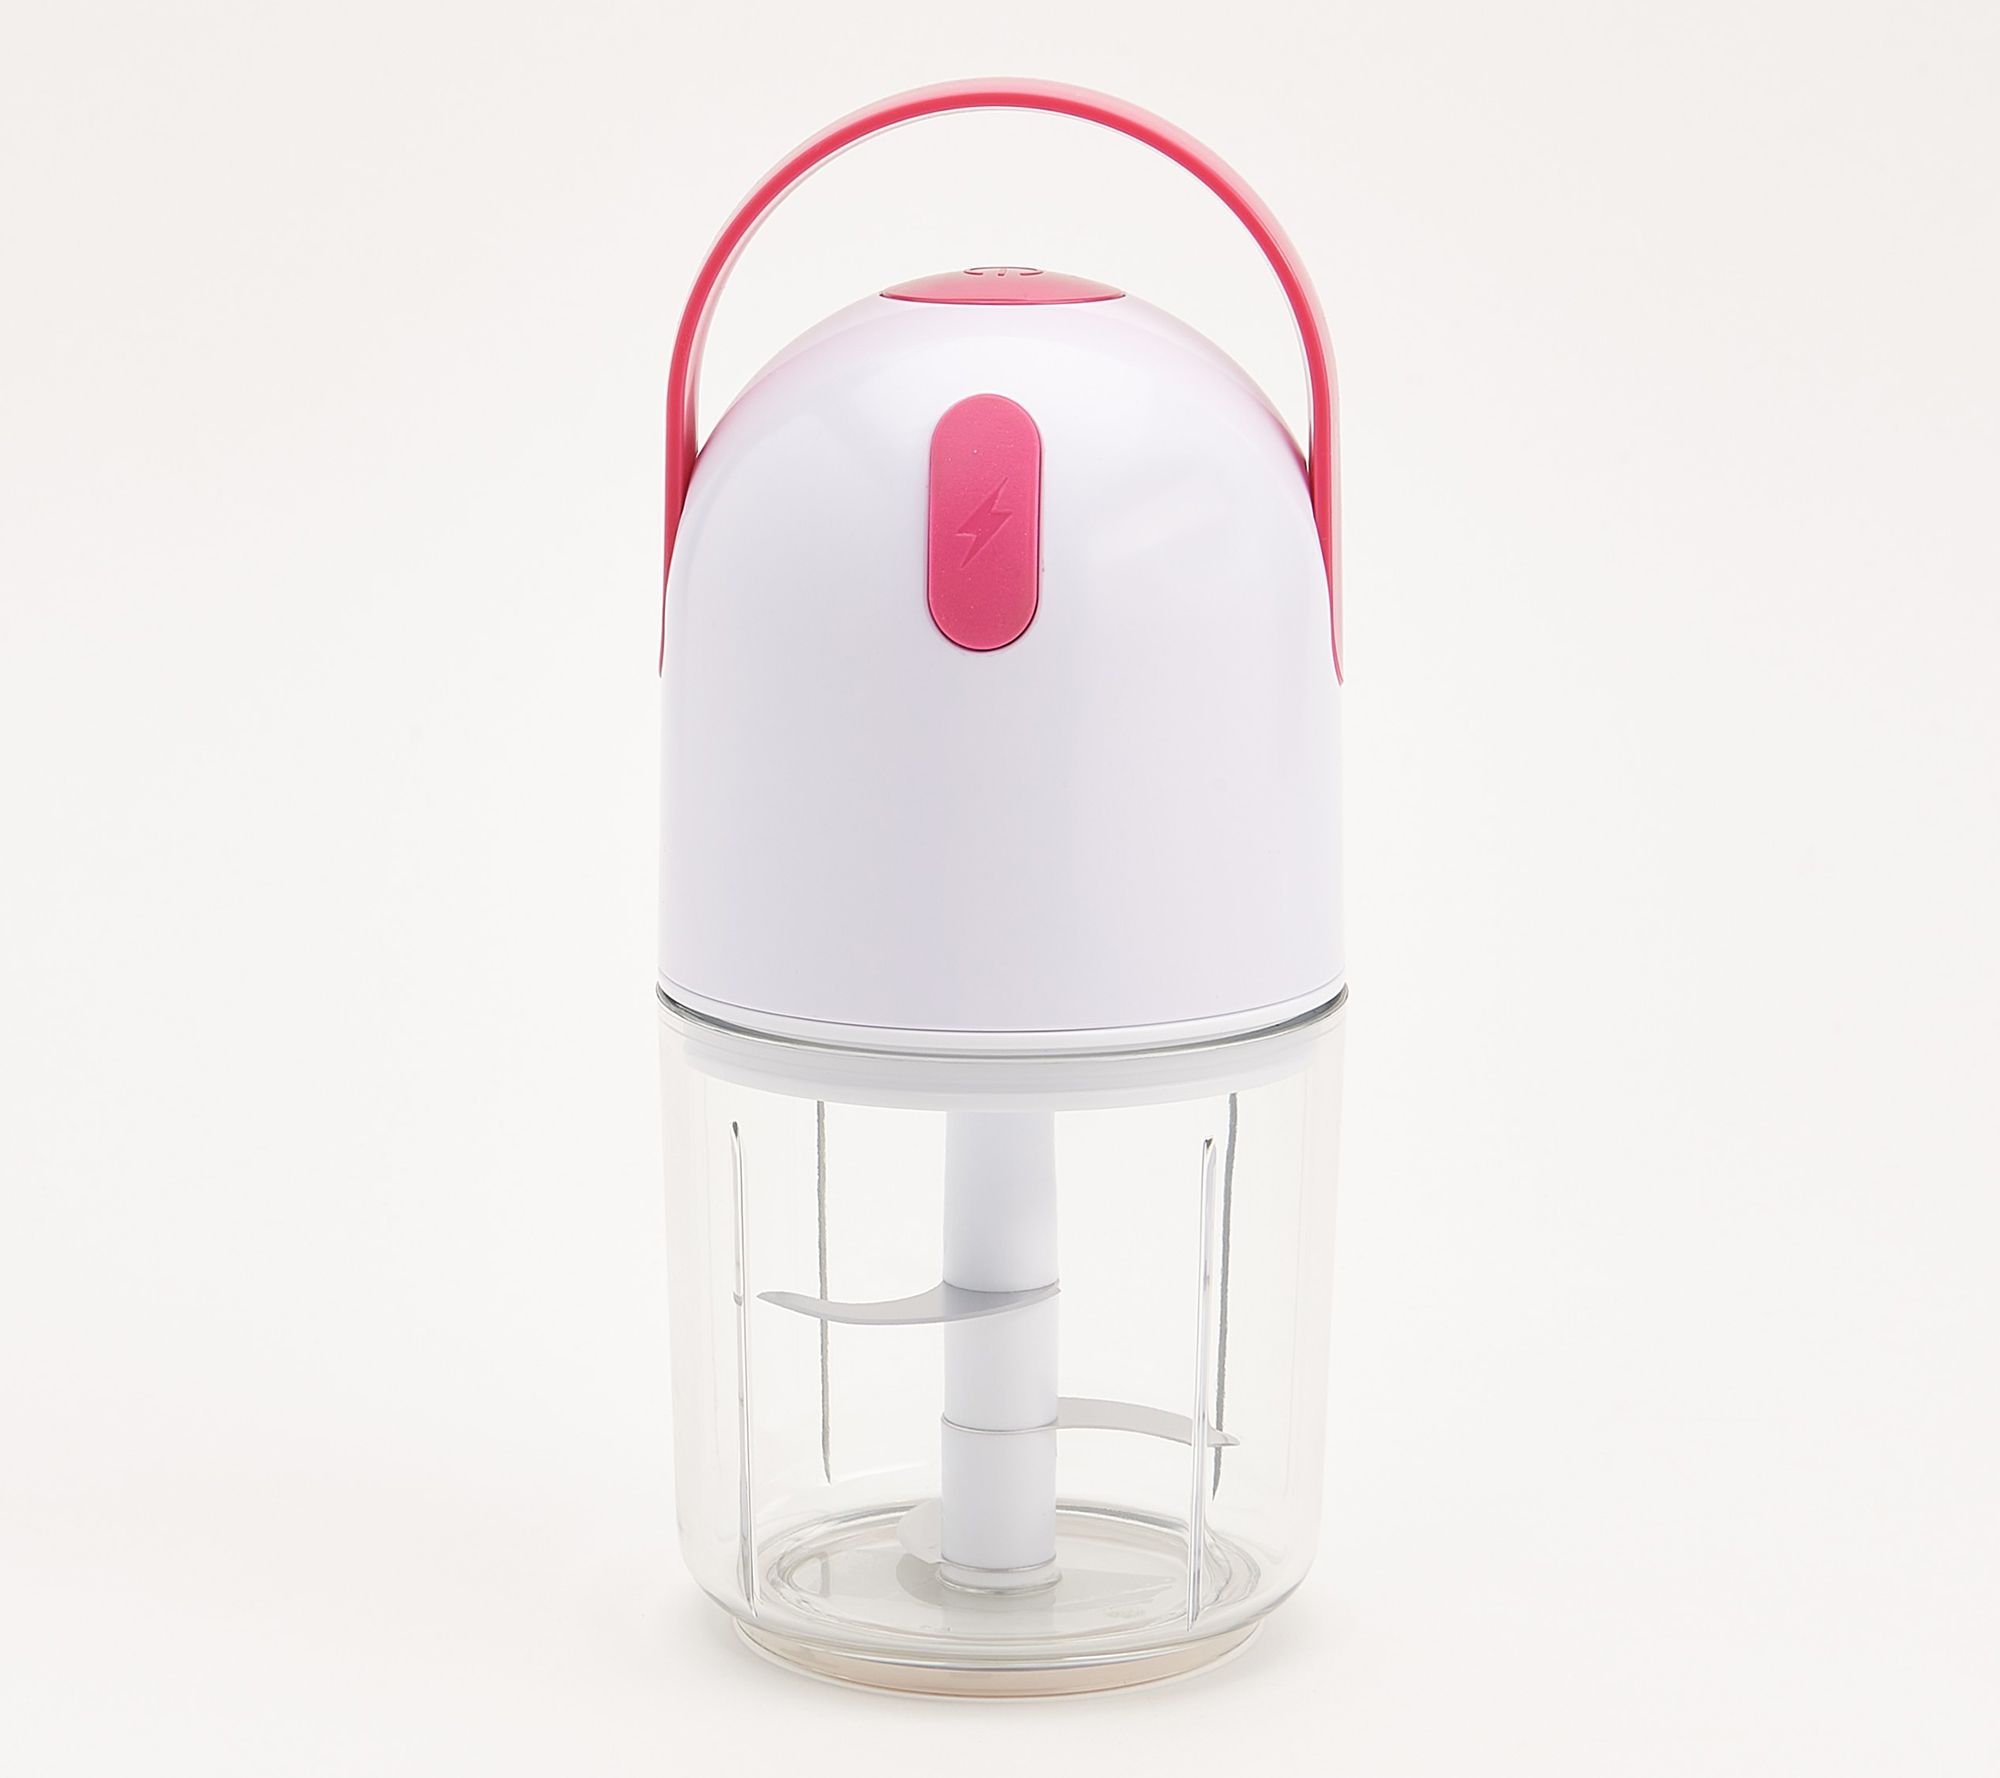 Prepology Rechargeable Mini Chopper w/ Extra Cups & Storage Lids on QVC 